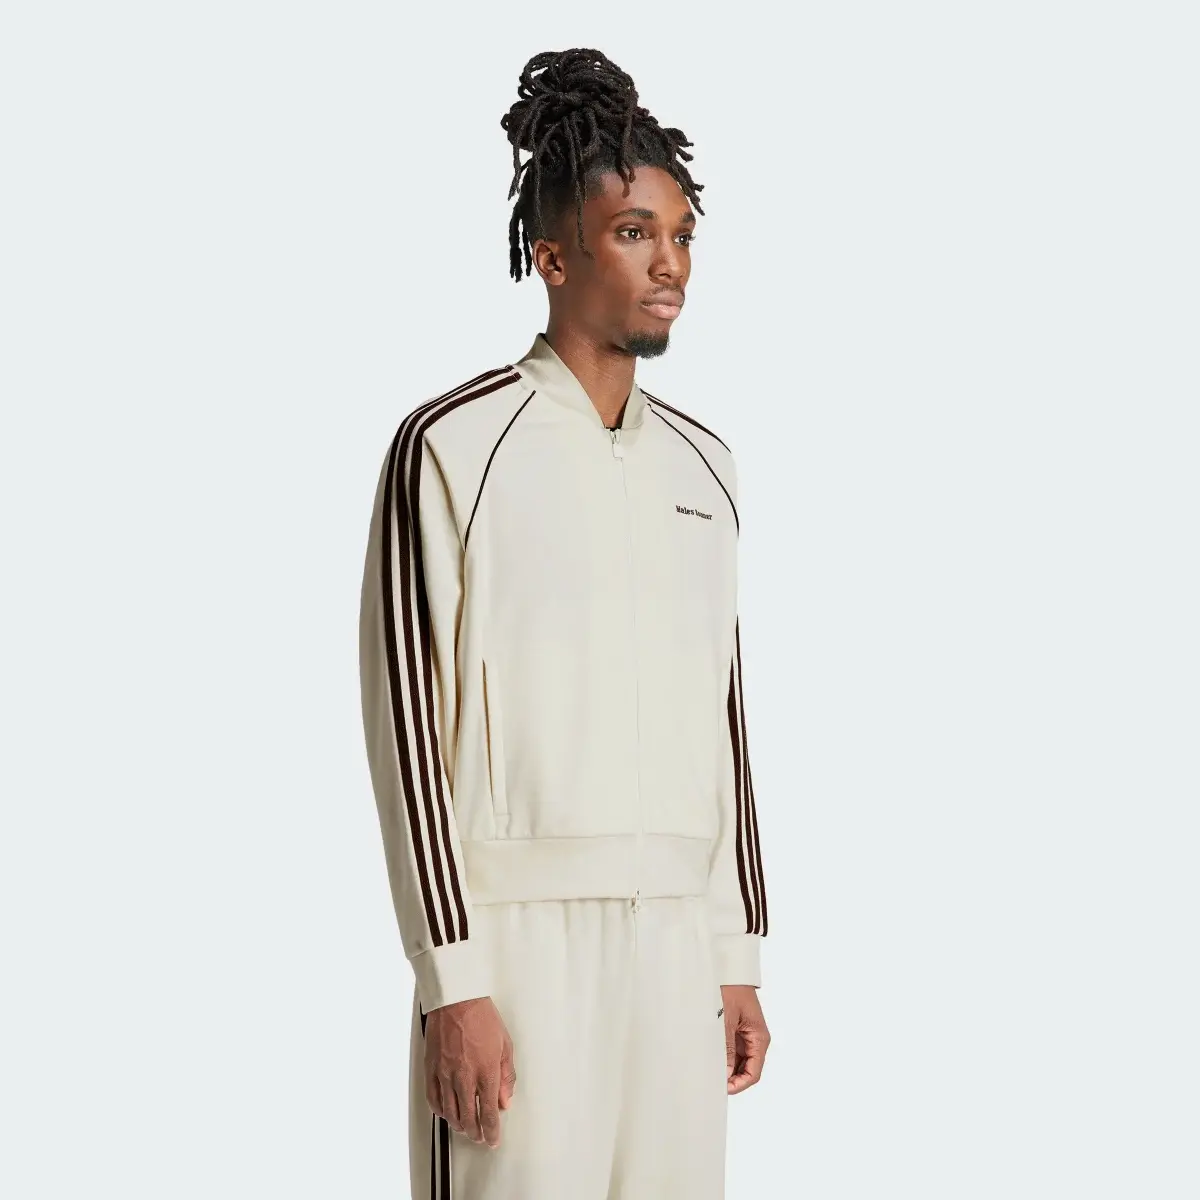 Adidas Track top Wales Bonner Statement. 3